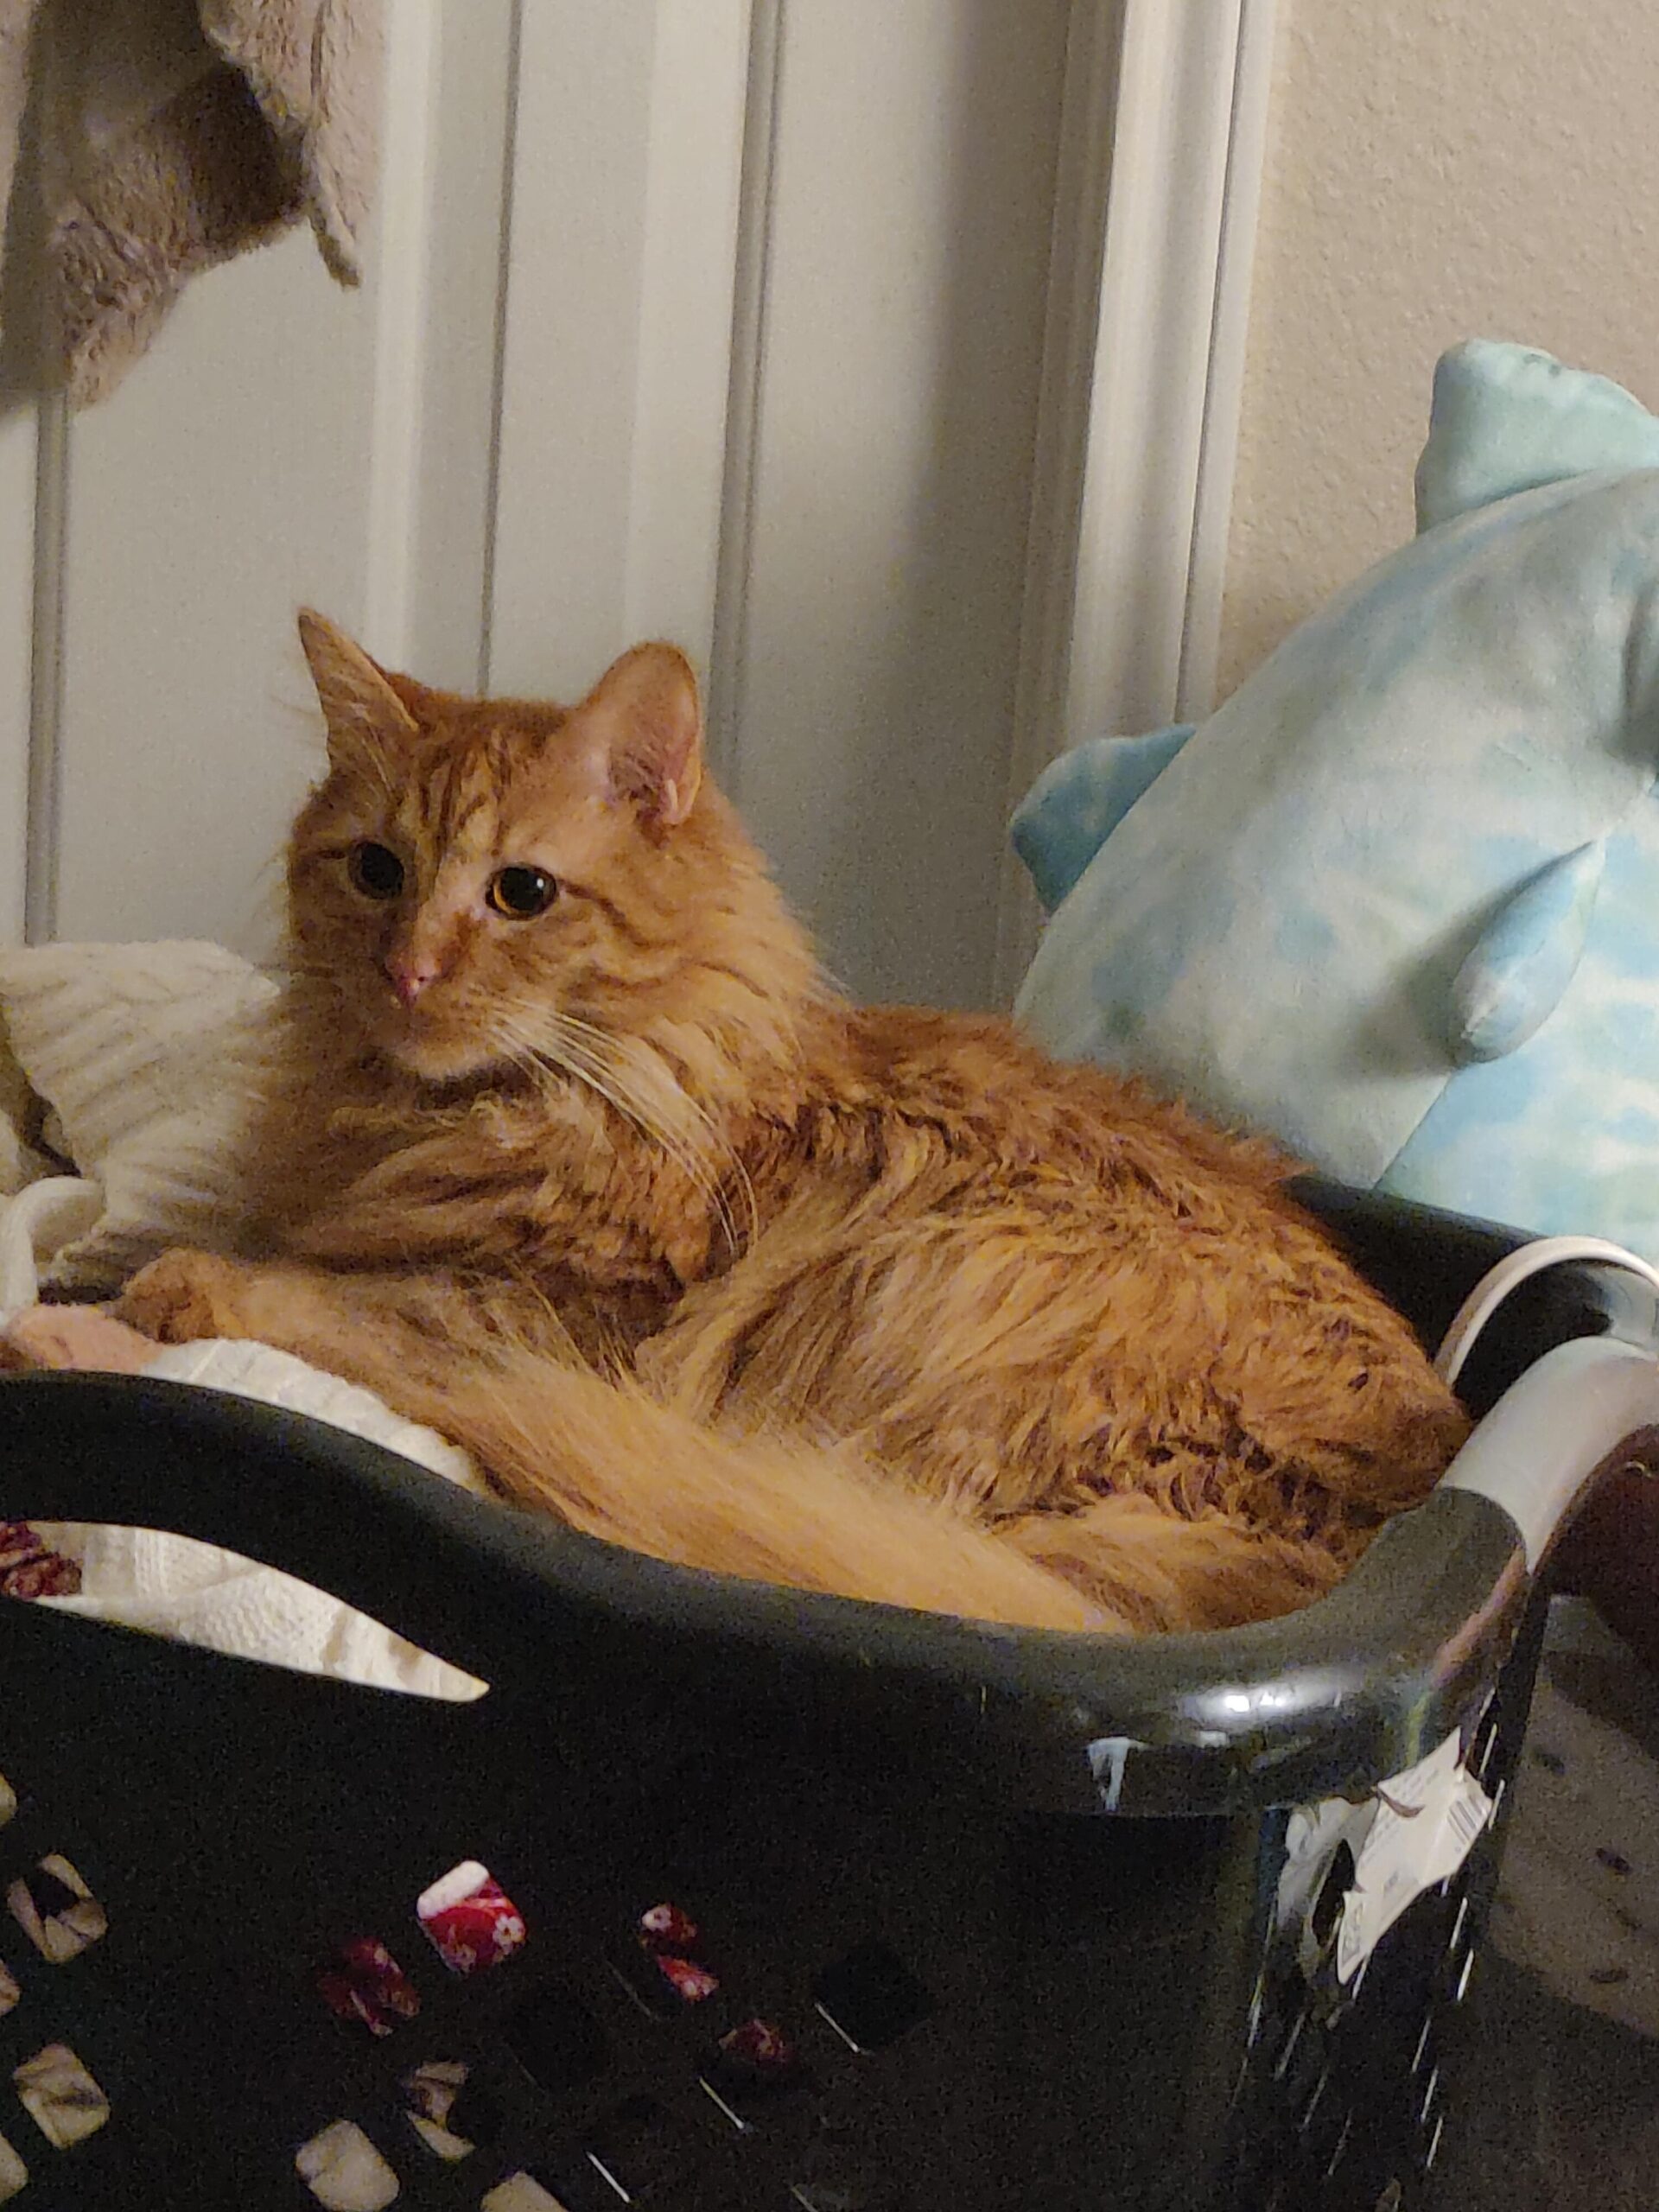 Laundry is forbidden, it would disturb his bed